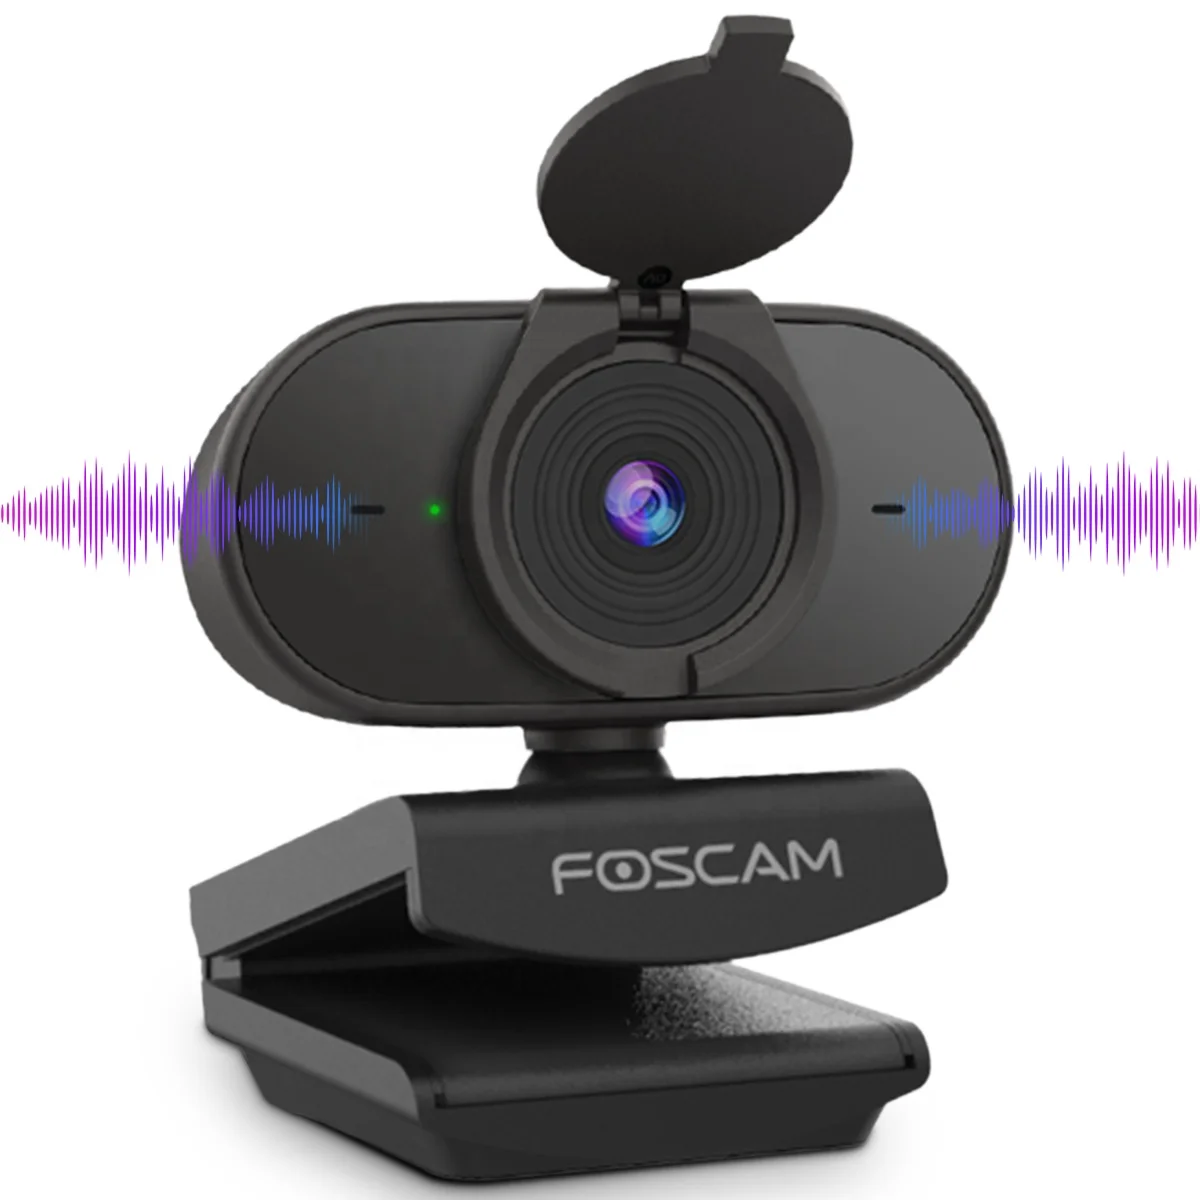 

Foscam OEM ODM Full Hd All in One Pc with Webcam 1080p 30fps with Mic Speaker MJPEG/YUY2 1920x1080 Support 2 Mega CN;GUA USB2.0